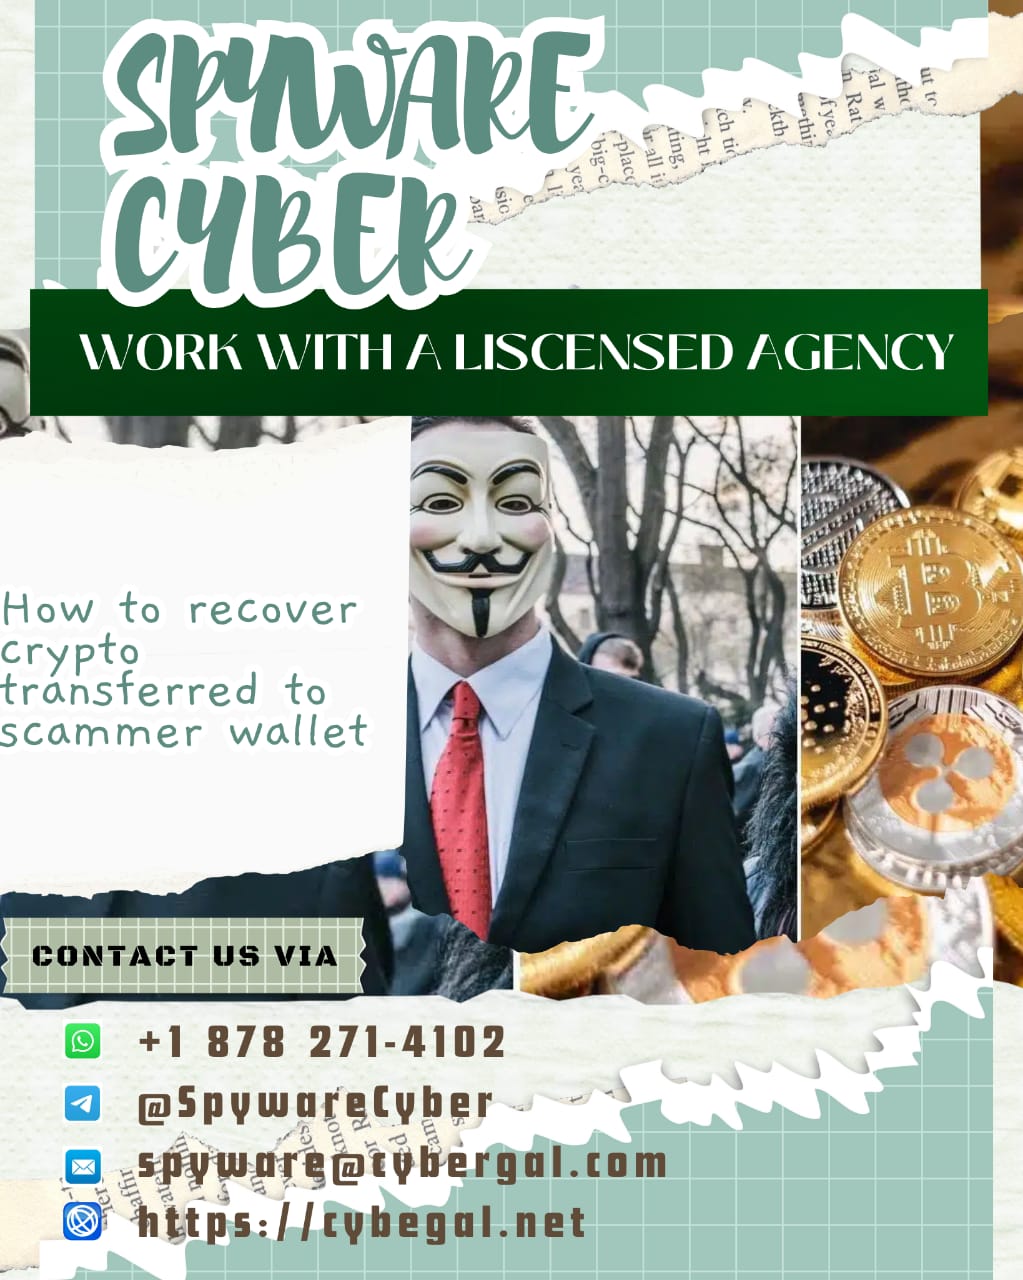 Fisker Alaska Pickup How to Recover Lost / Stolen BTC, Tether USDT - Go to OMEGA CRYPTO RECOVERY SPECIALIST HACKER WhatsApp Image 2024-04-12 at 16.51.28_40028be0